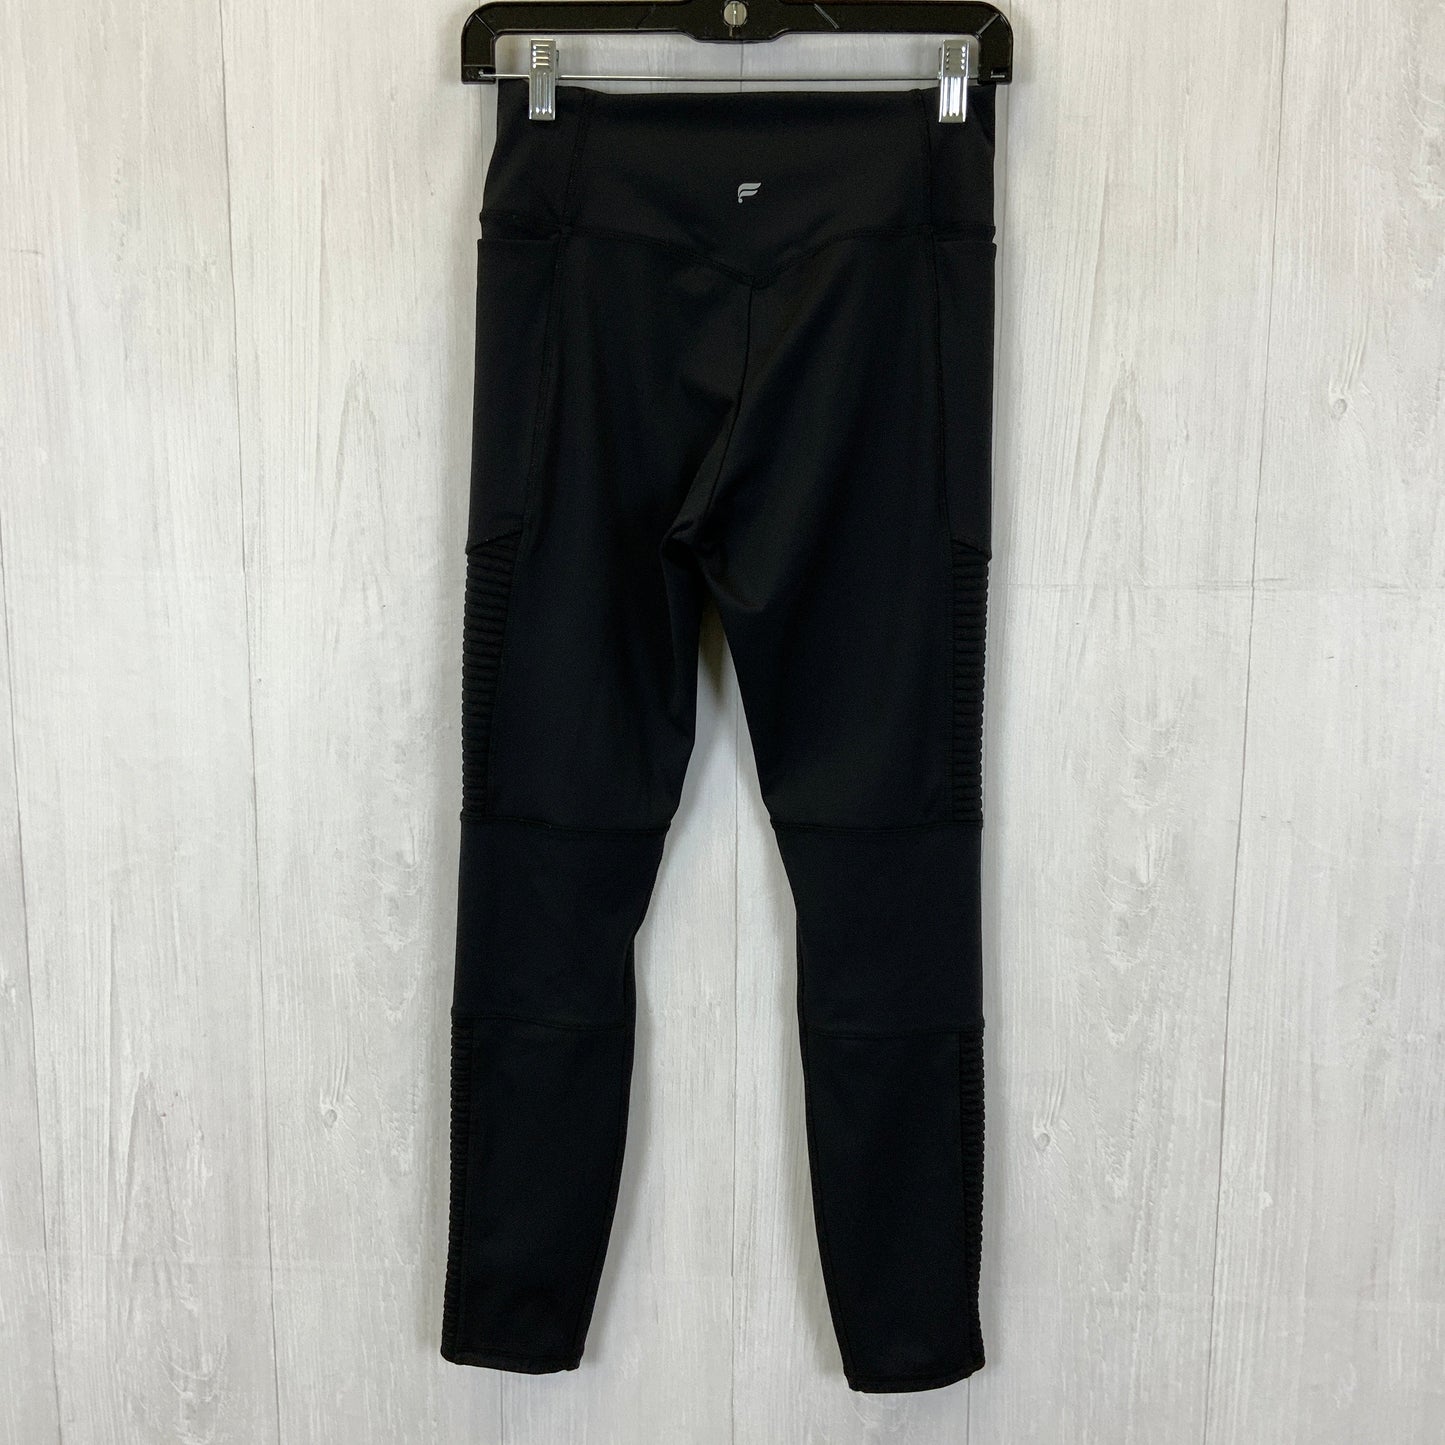 Athletic Leggings By Fabletics  Size: M